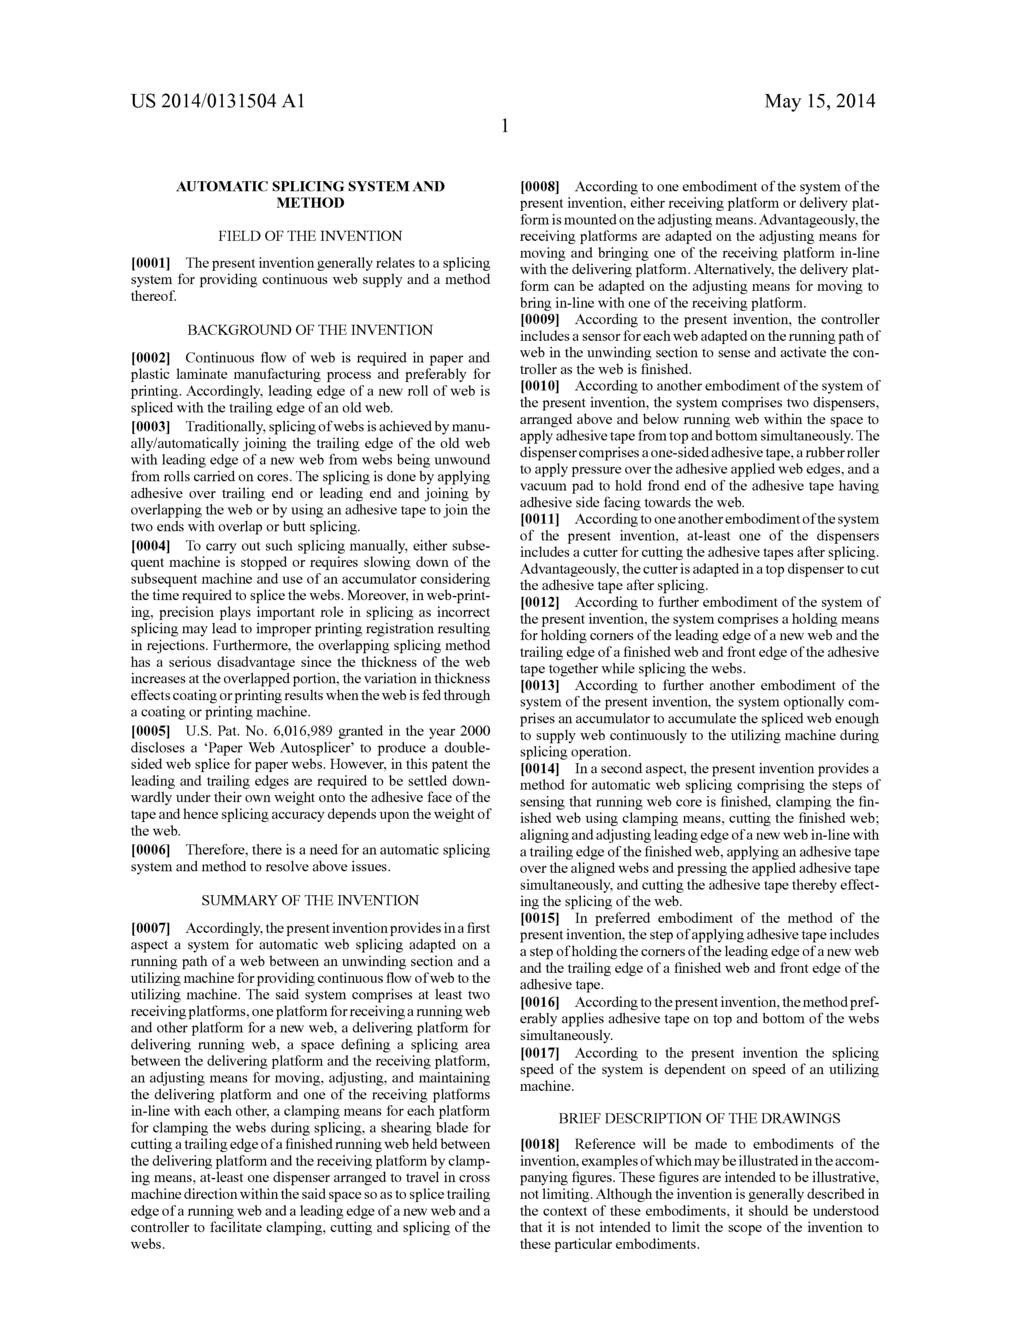 US 2014/013 1504 A1 May 15, 2014 AUTOMATIC SPLICING SYSTEMAND METHOD FIELD OF THE INVENTION 0001.